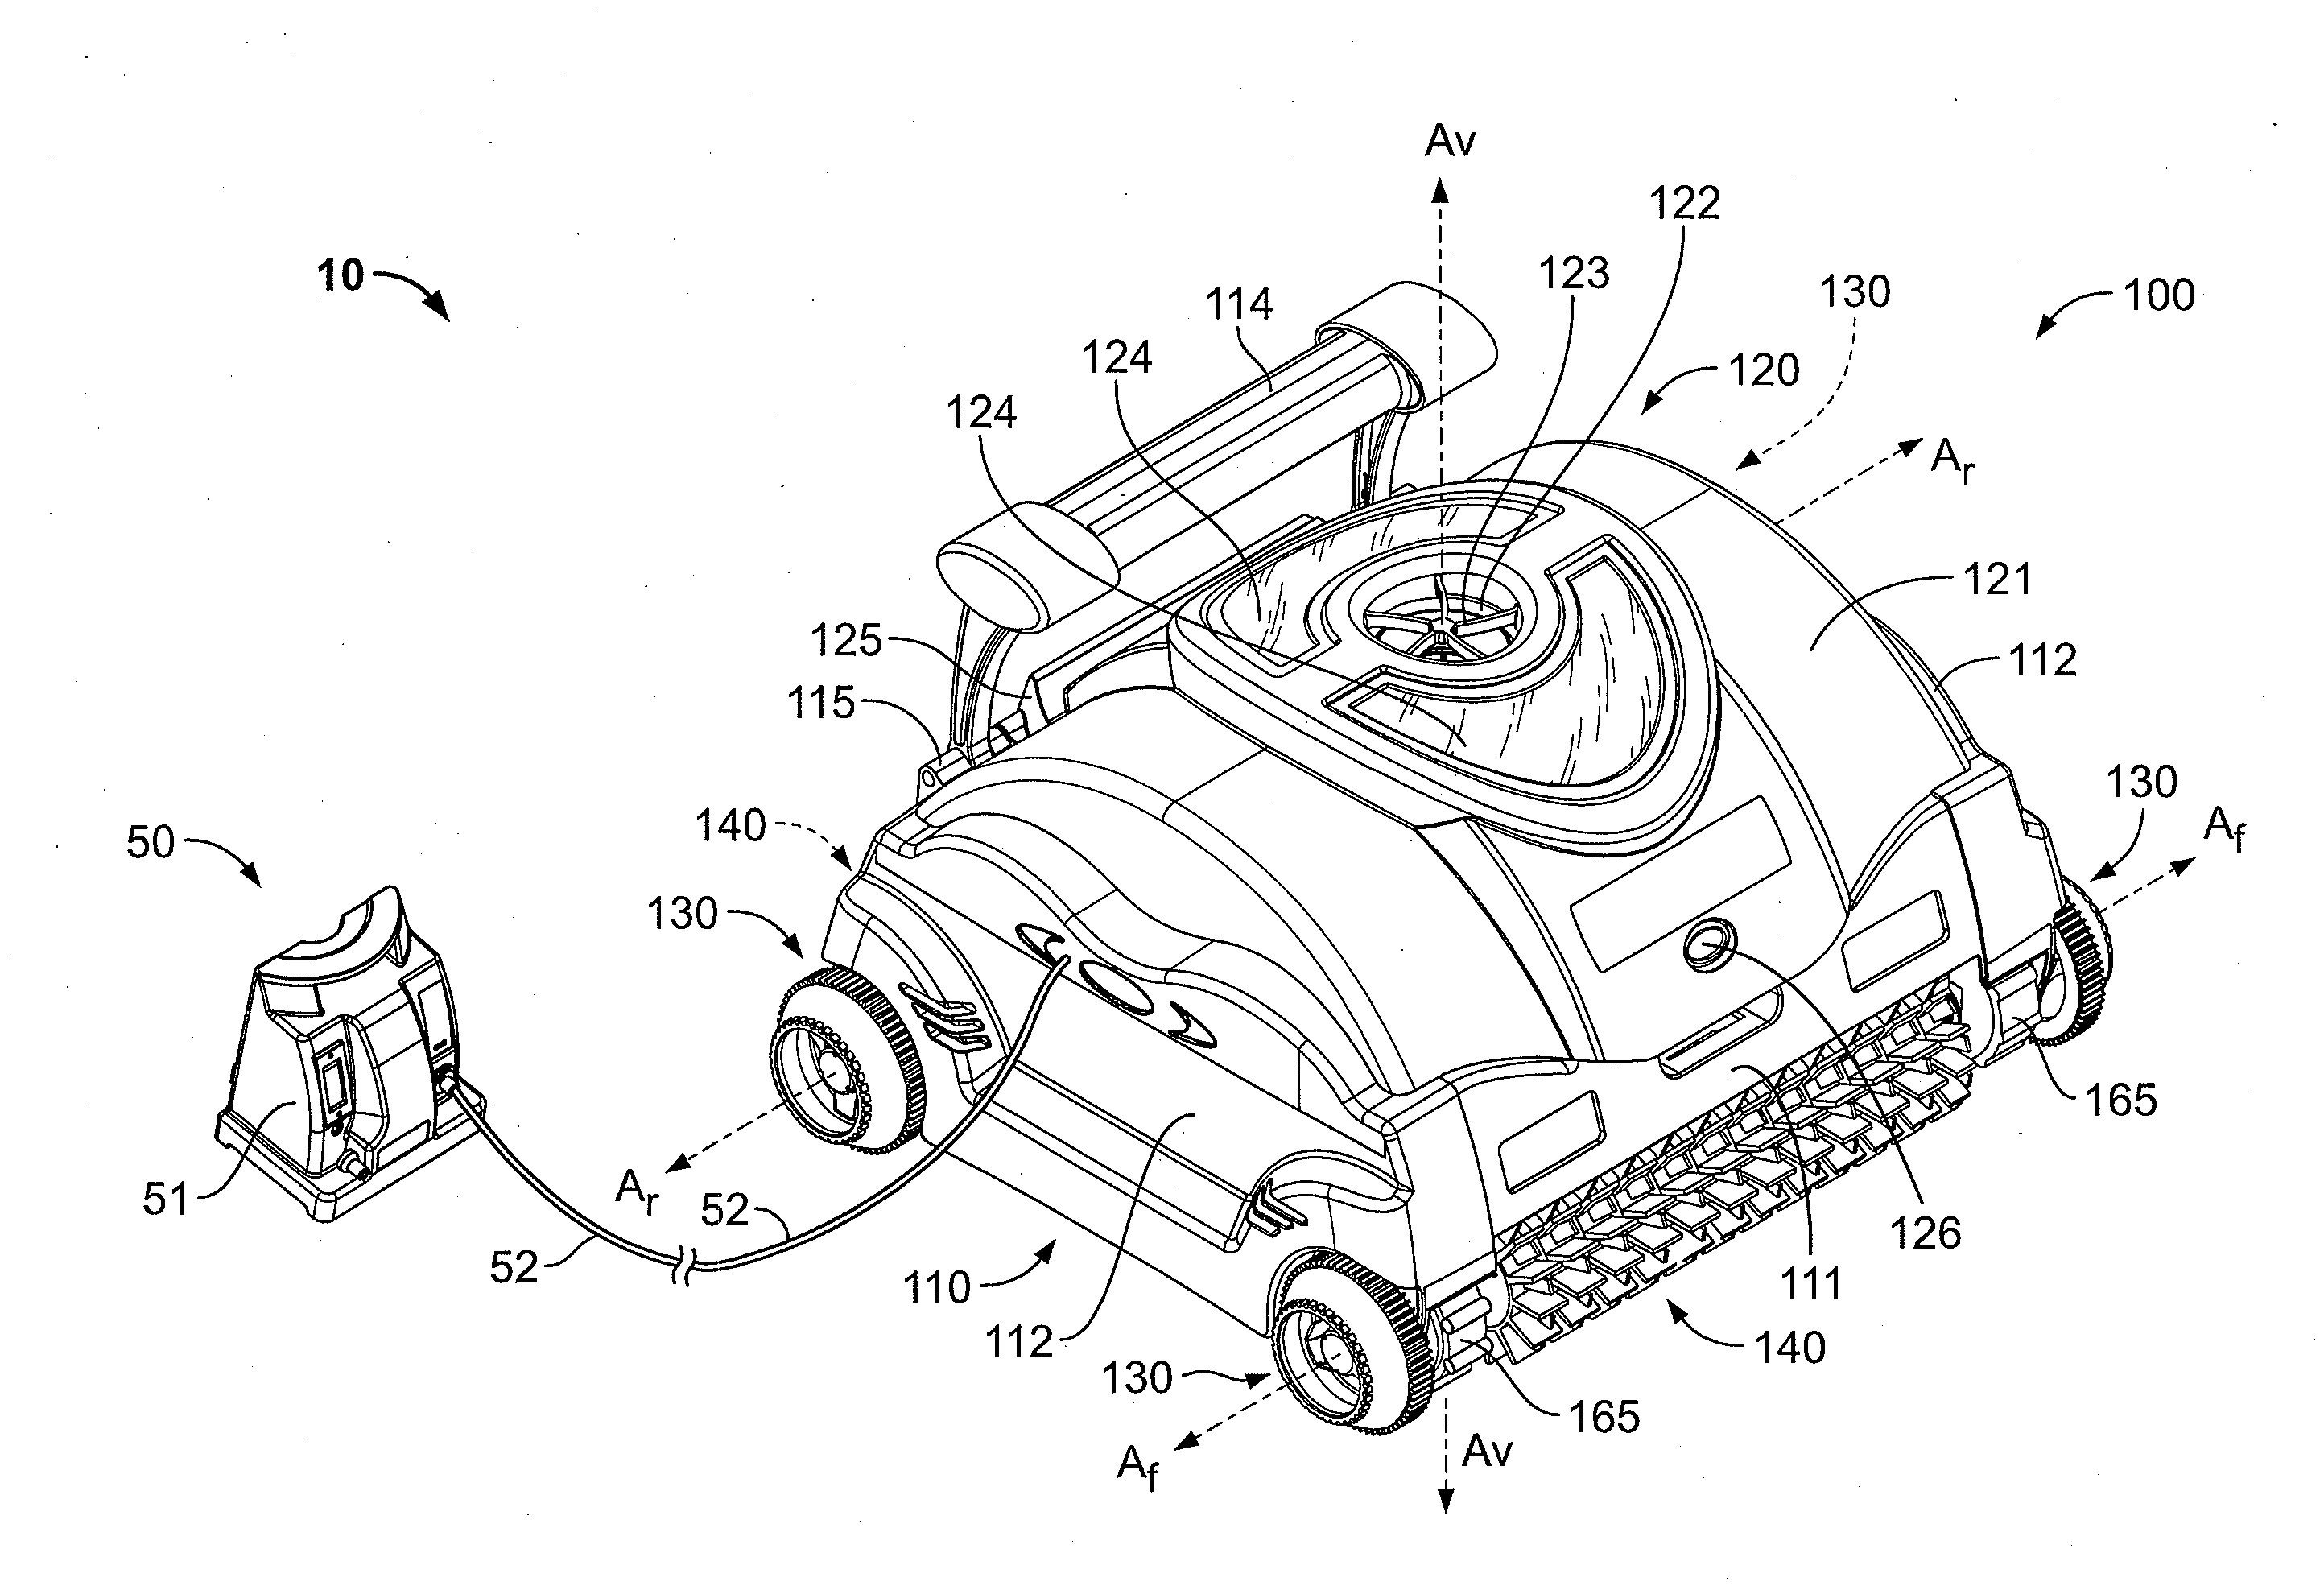 Apparatus for Facilitating Maintenance of a Pool Cleaning Device